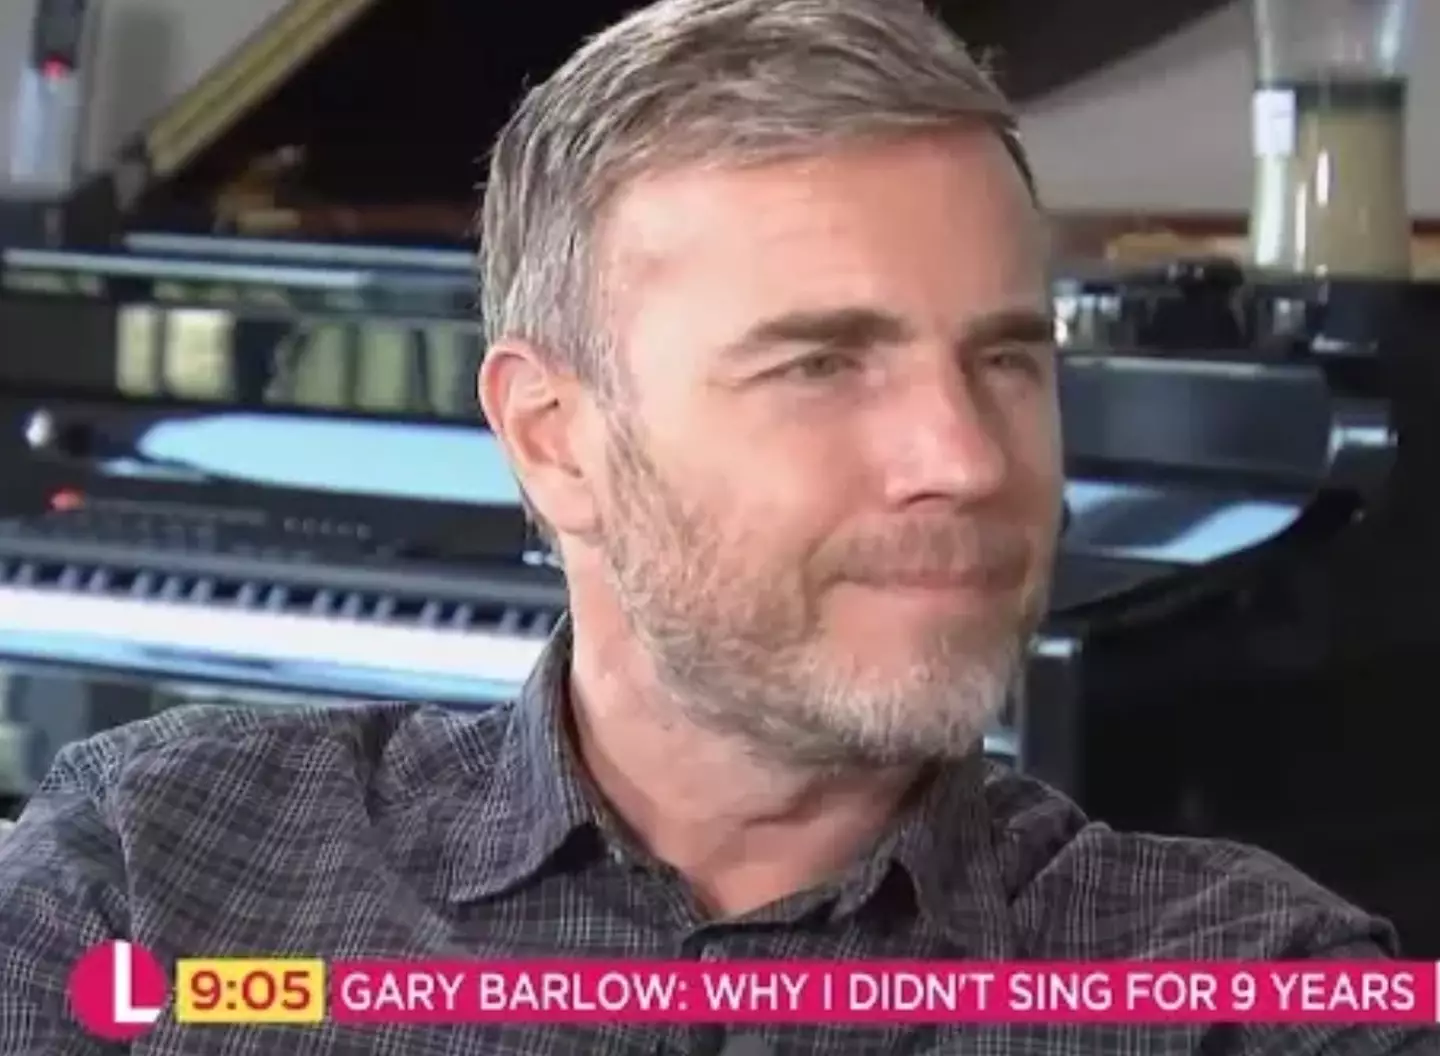 Speaking previously, Barlow admitted that he struggled with an eating disorder.